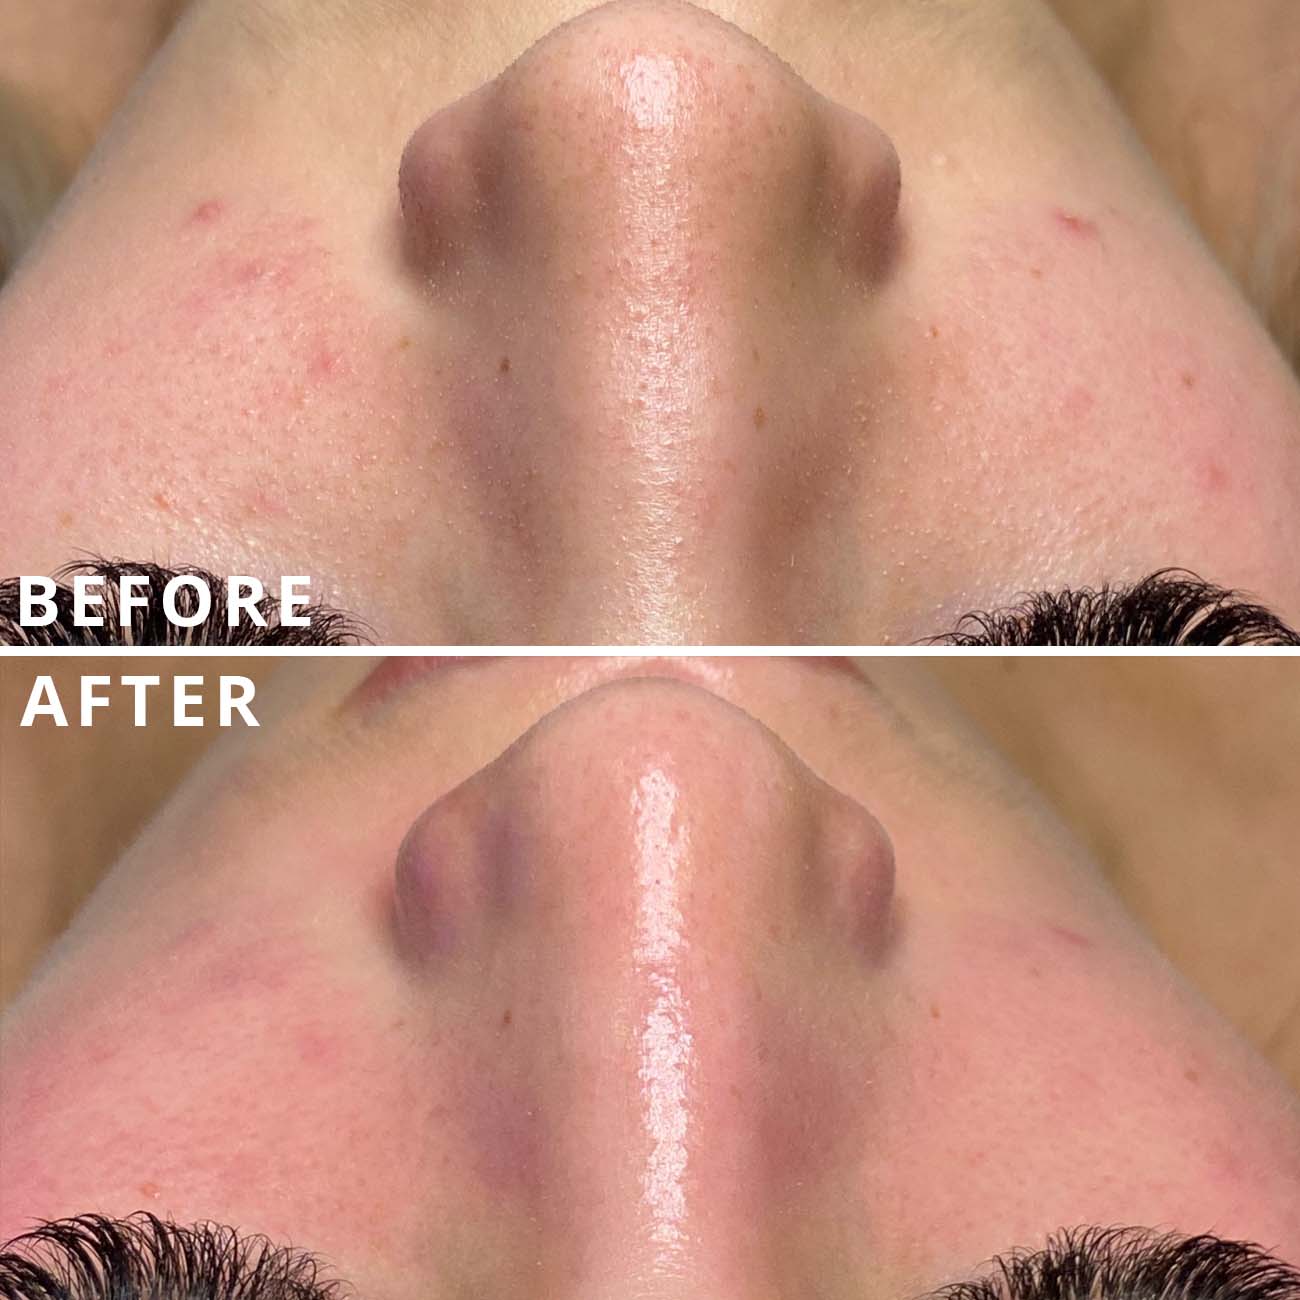 Womans nose and cheeks showing amazing before and after results from hydrafacial, skin looking clear and glowing.